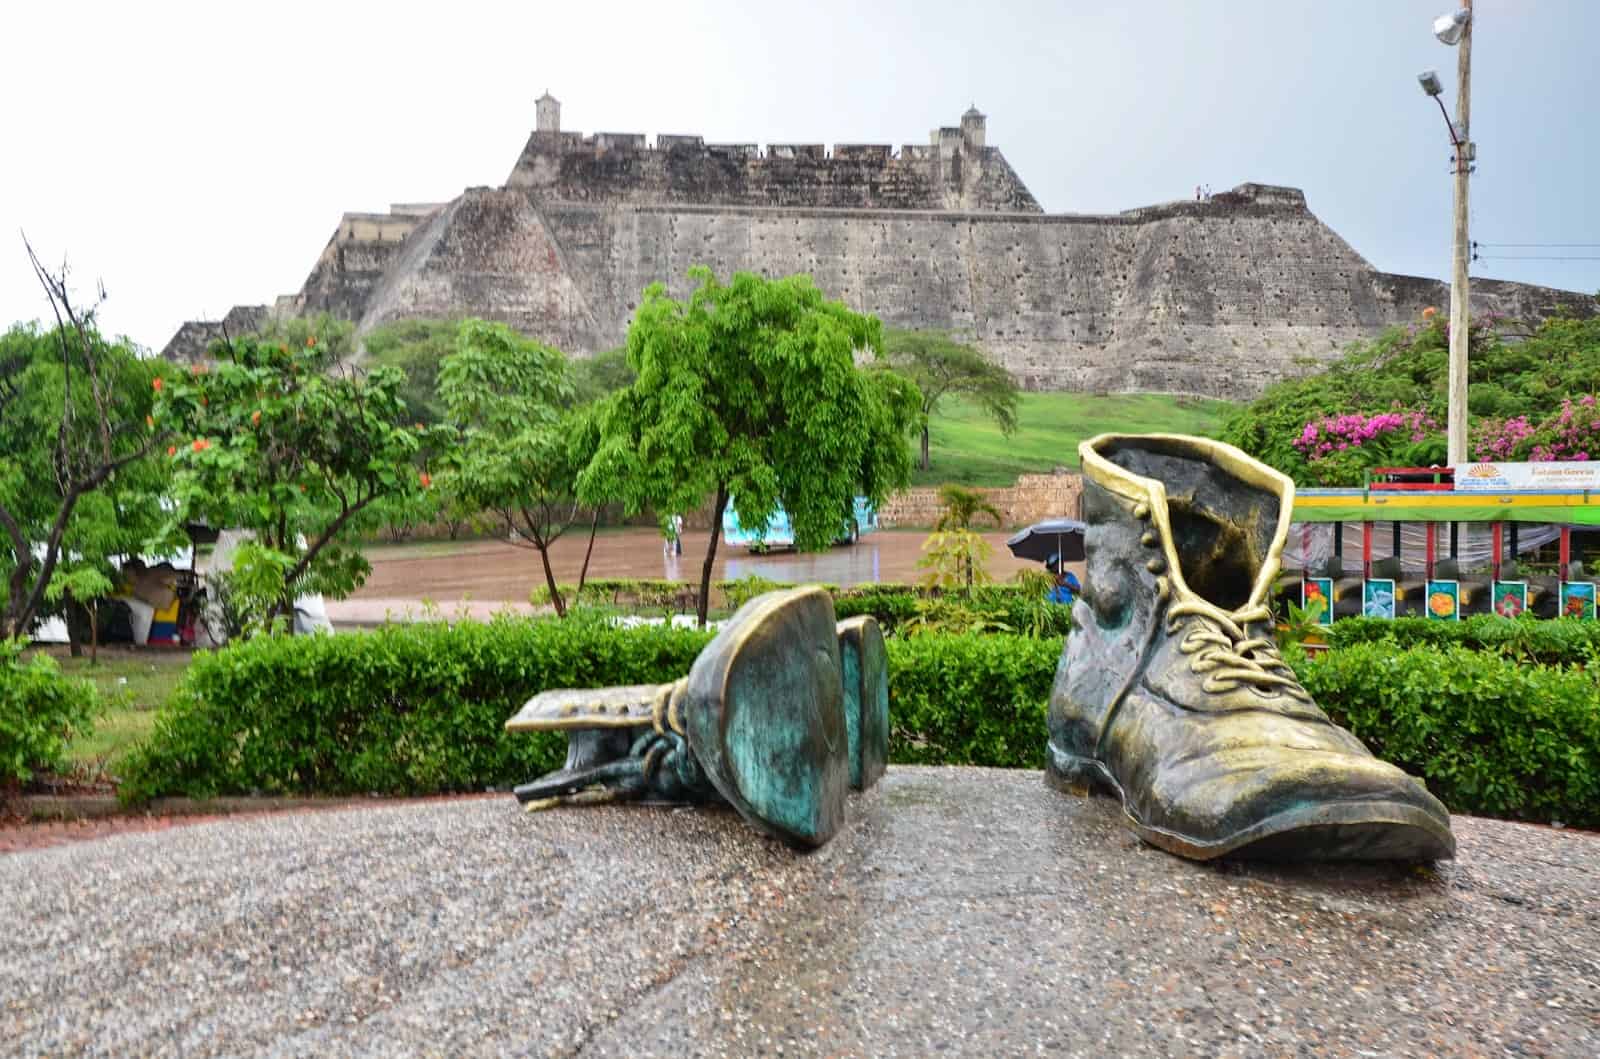 The Old Shoes in Cartagena, Bolívar, Colombia